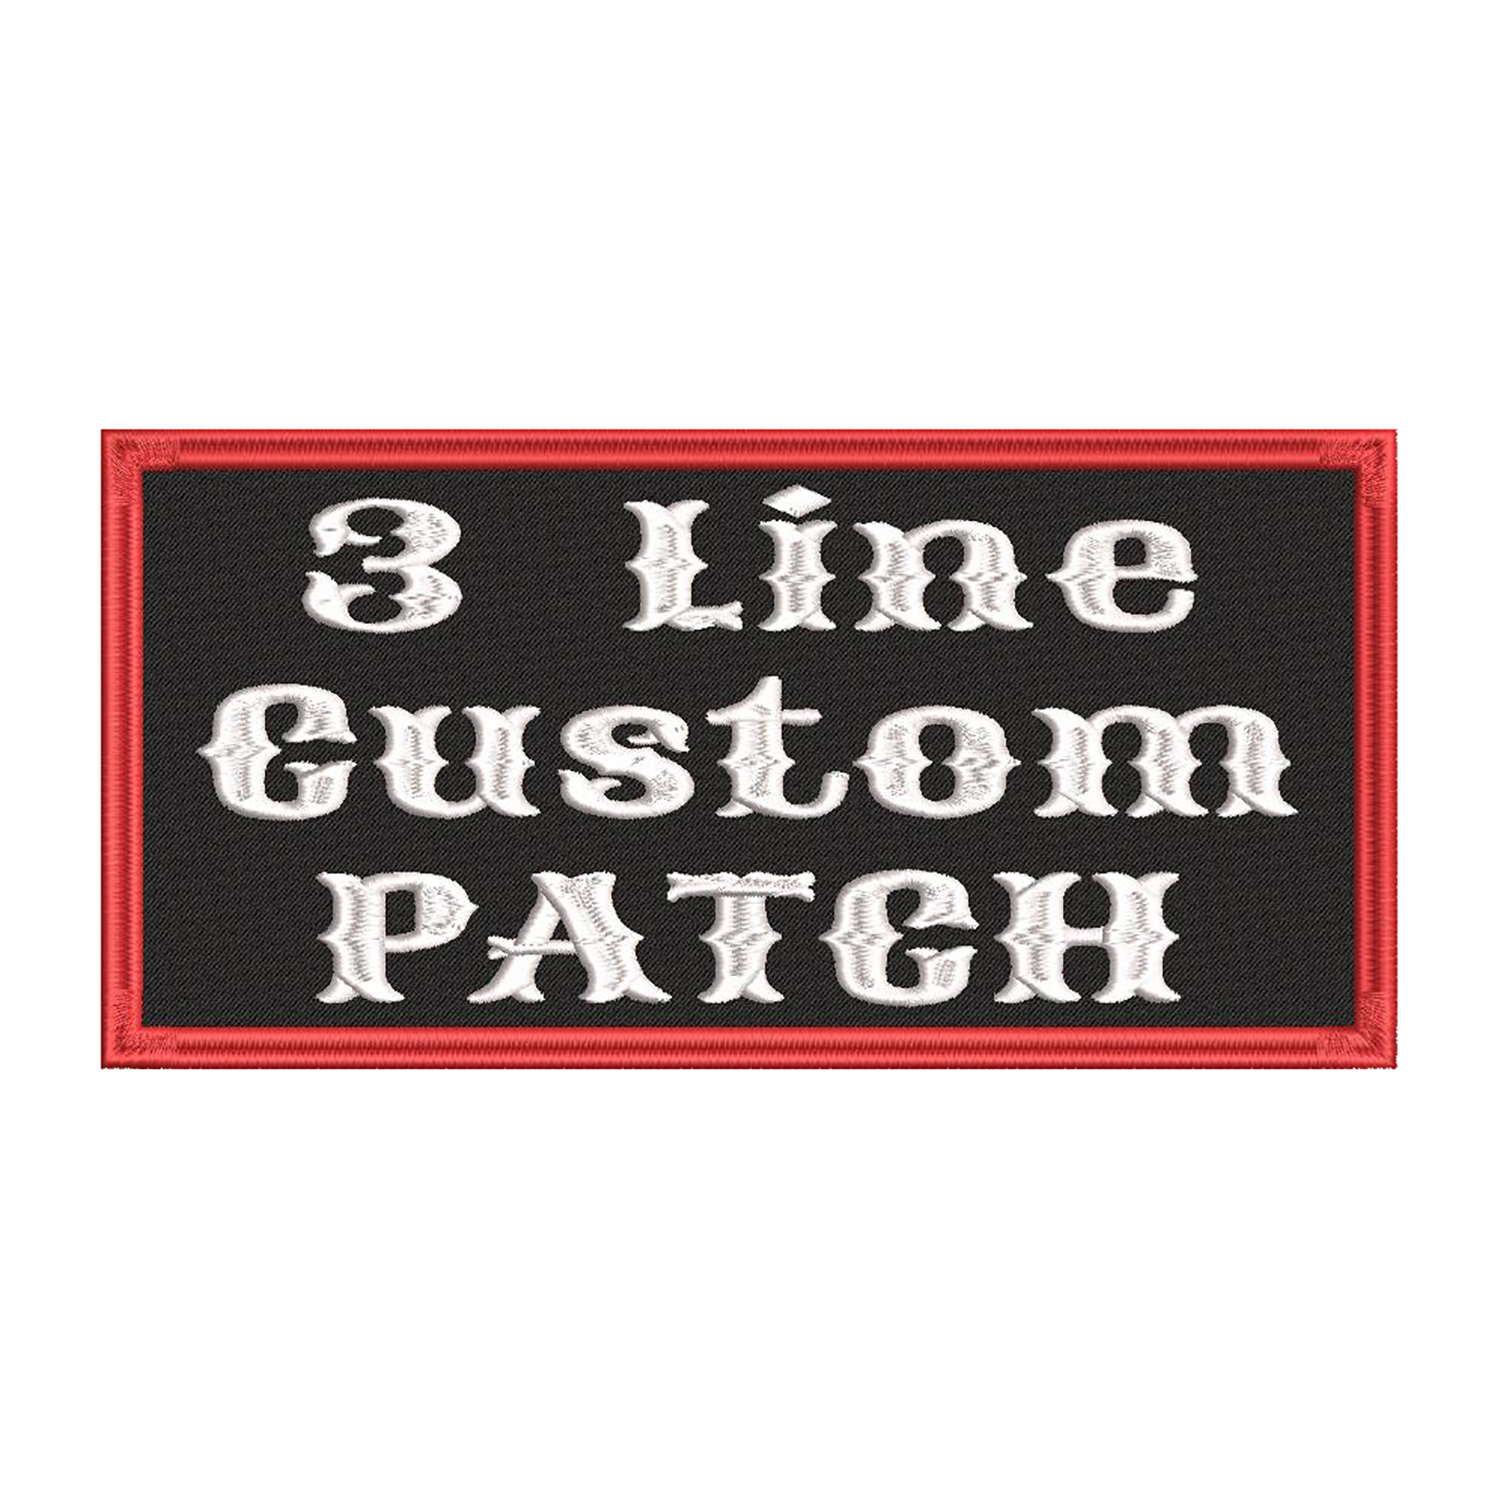 B Custom Embroidered Name Tag Hook Patch Motorcycle Biker Patches 5" x 1.3"